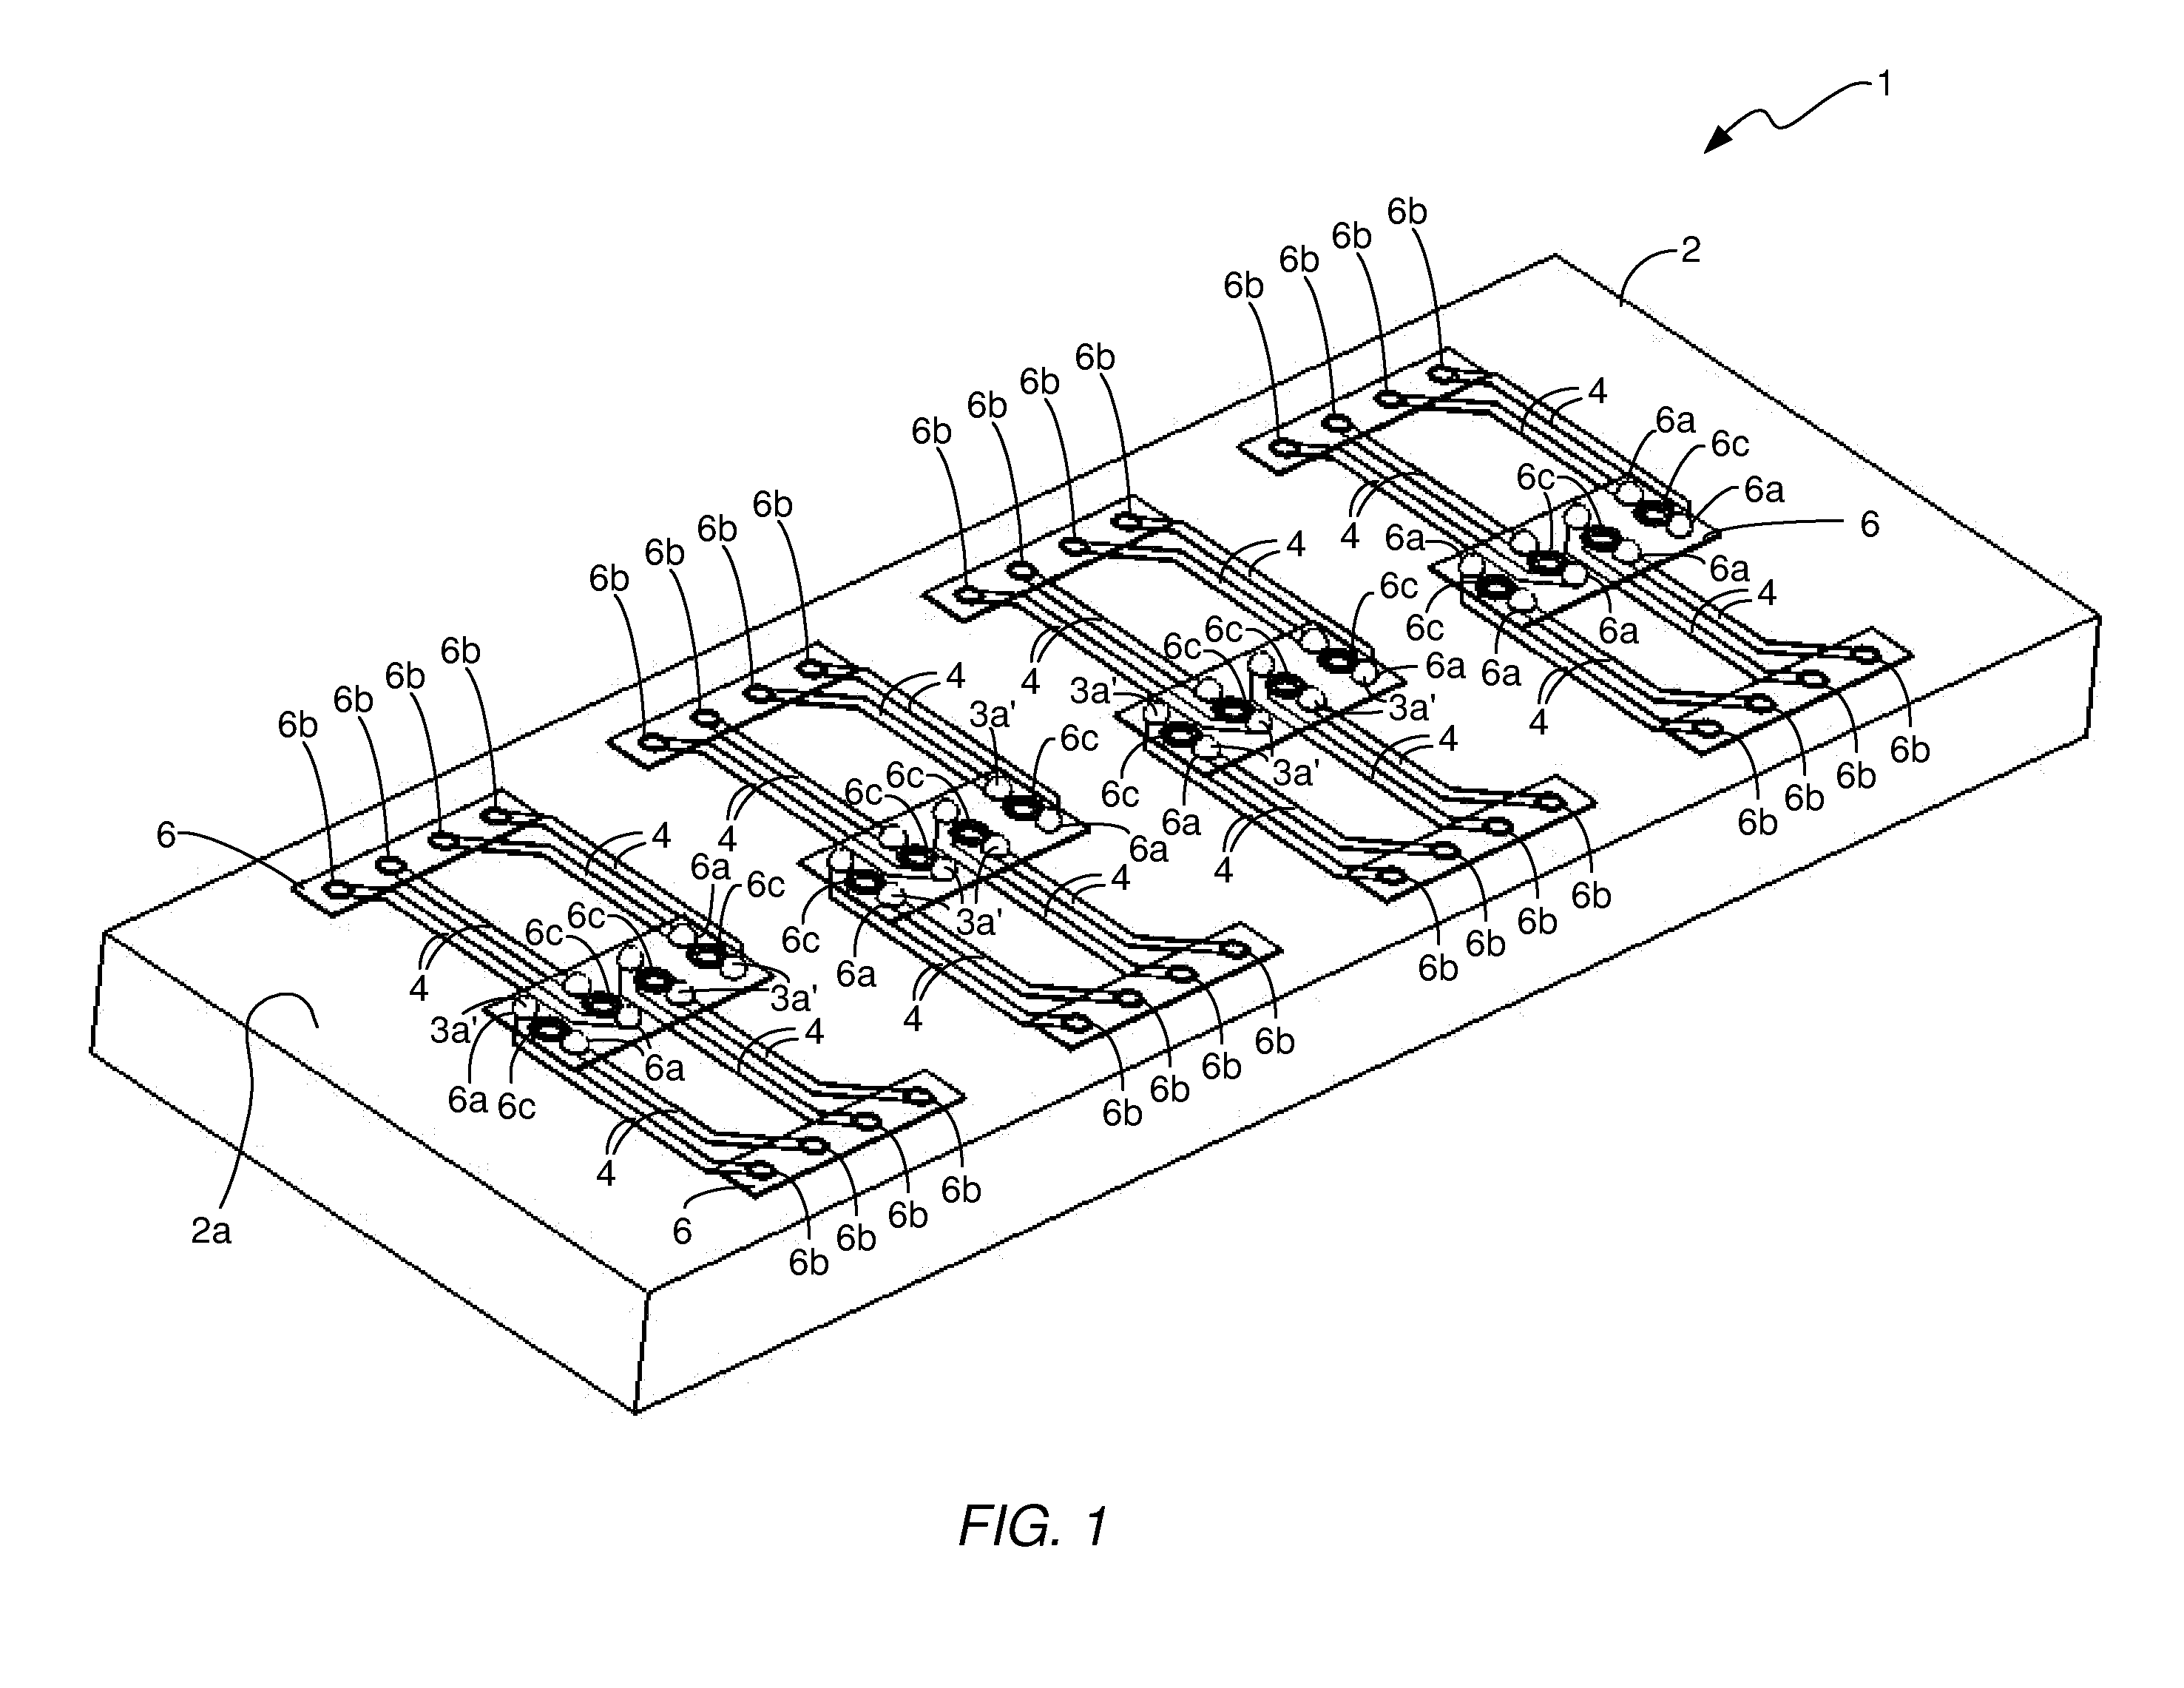 FLIP-CHIP ASSEMBLY COMPRISING AN ARRAY OF VERTICAL CAVITY SURFACE EMITTING LASERS (VCSELSs)